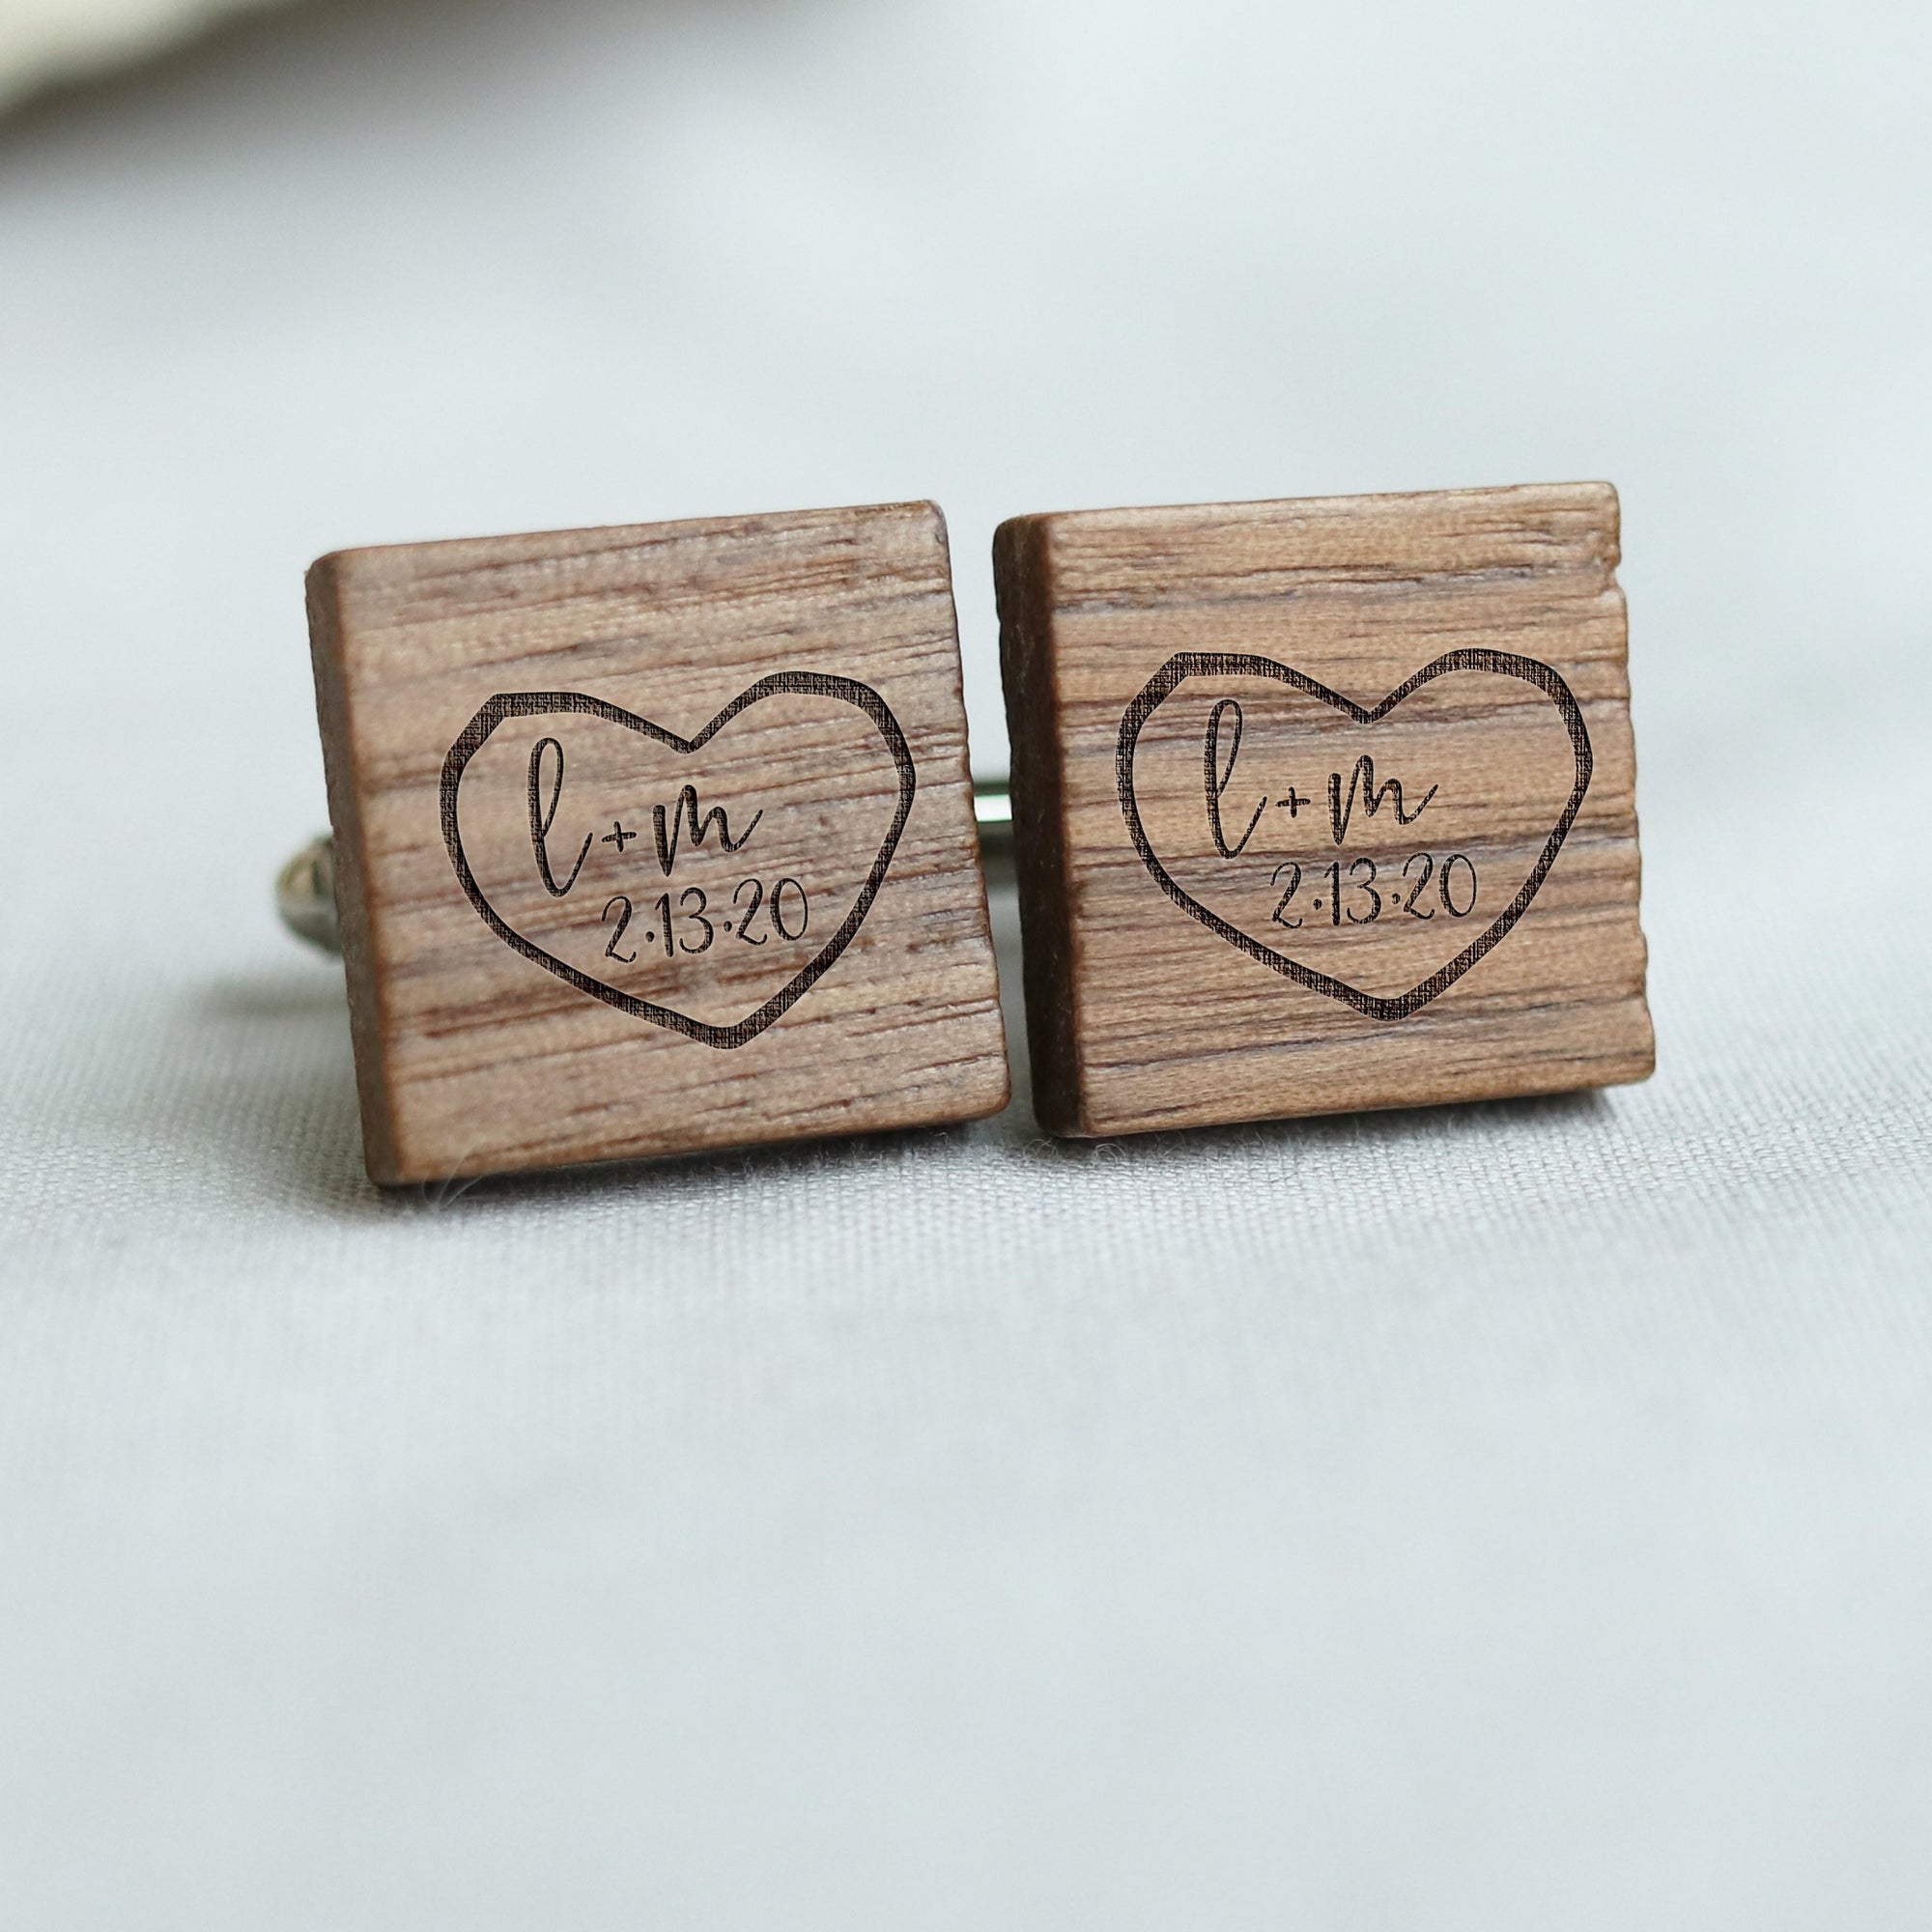 Laser Engraved Personalized Cufflinks, Heart Carving, Wood, Wedding Date, Custom Initials, Cuff links, Gift for Men, for Him, TBC10067